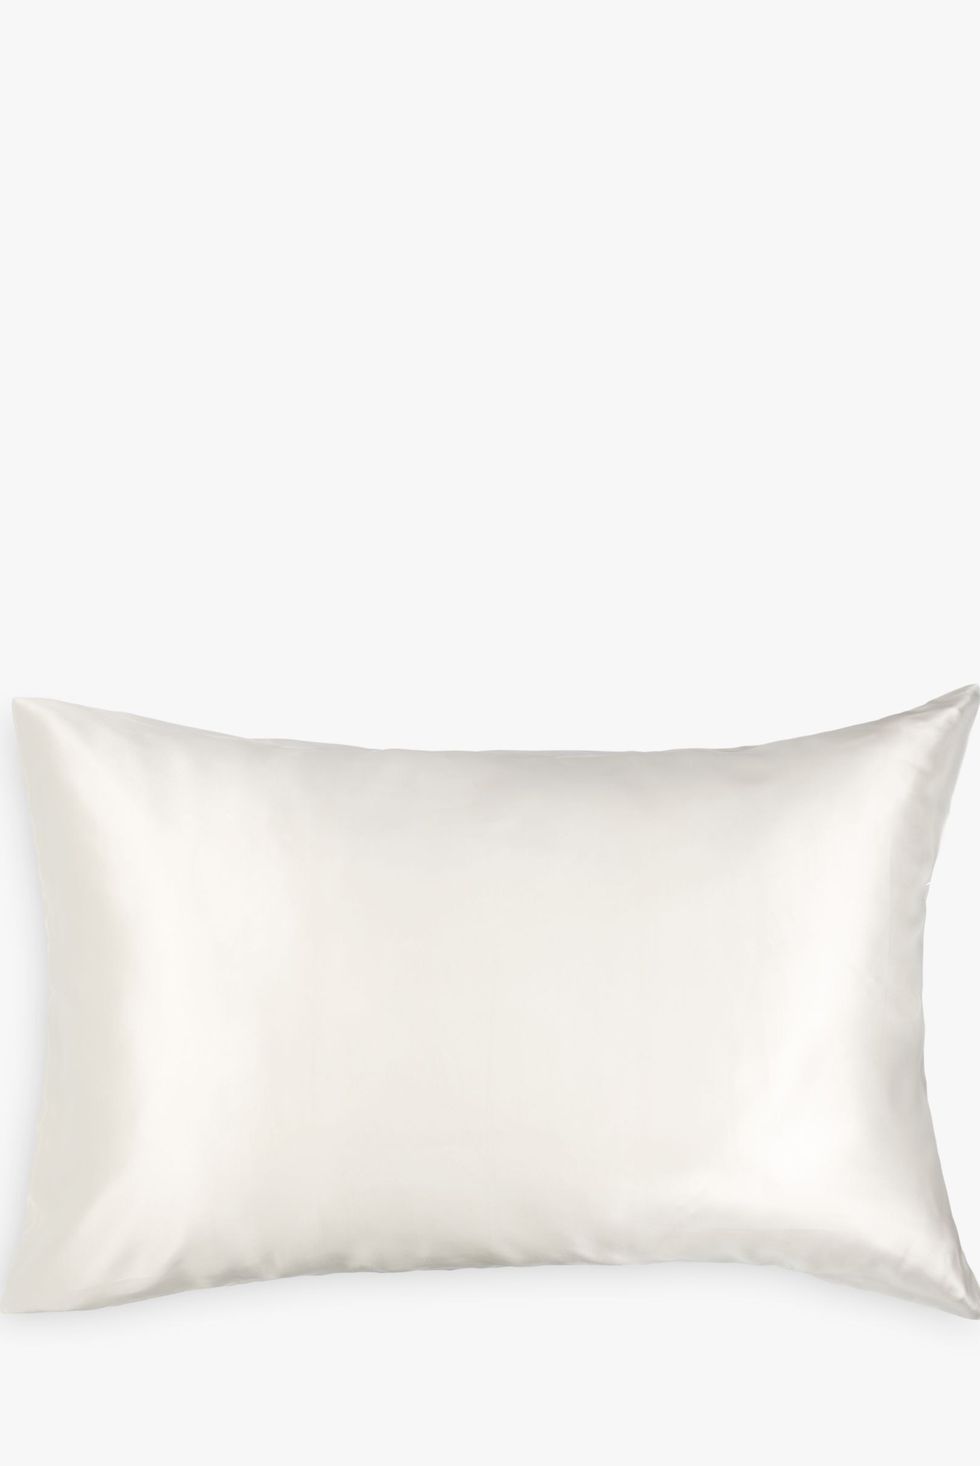 John Lewis & Partners The Ultimate Collection Silk Standard Pillowcase, Pearl grey